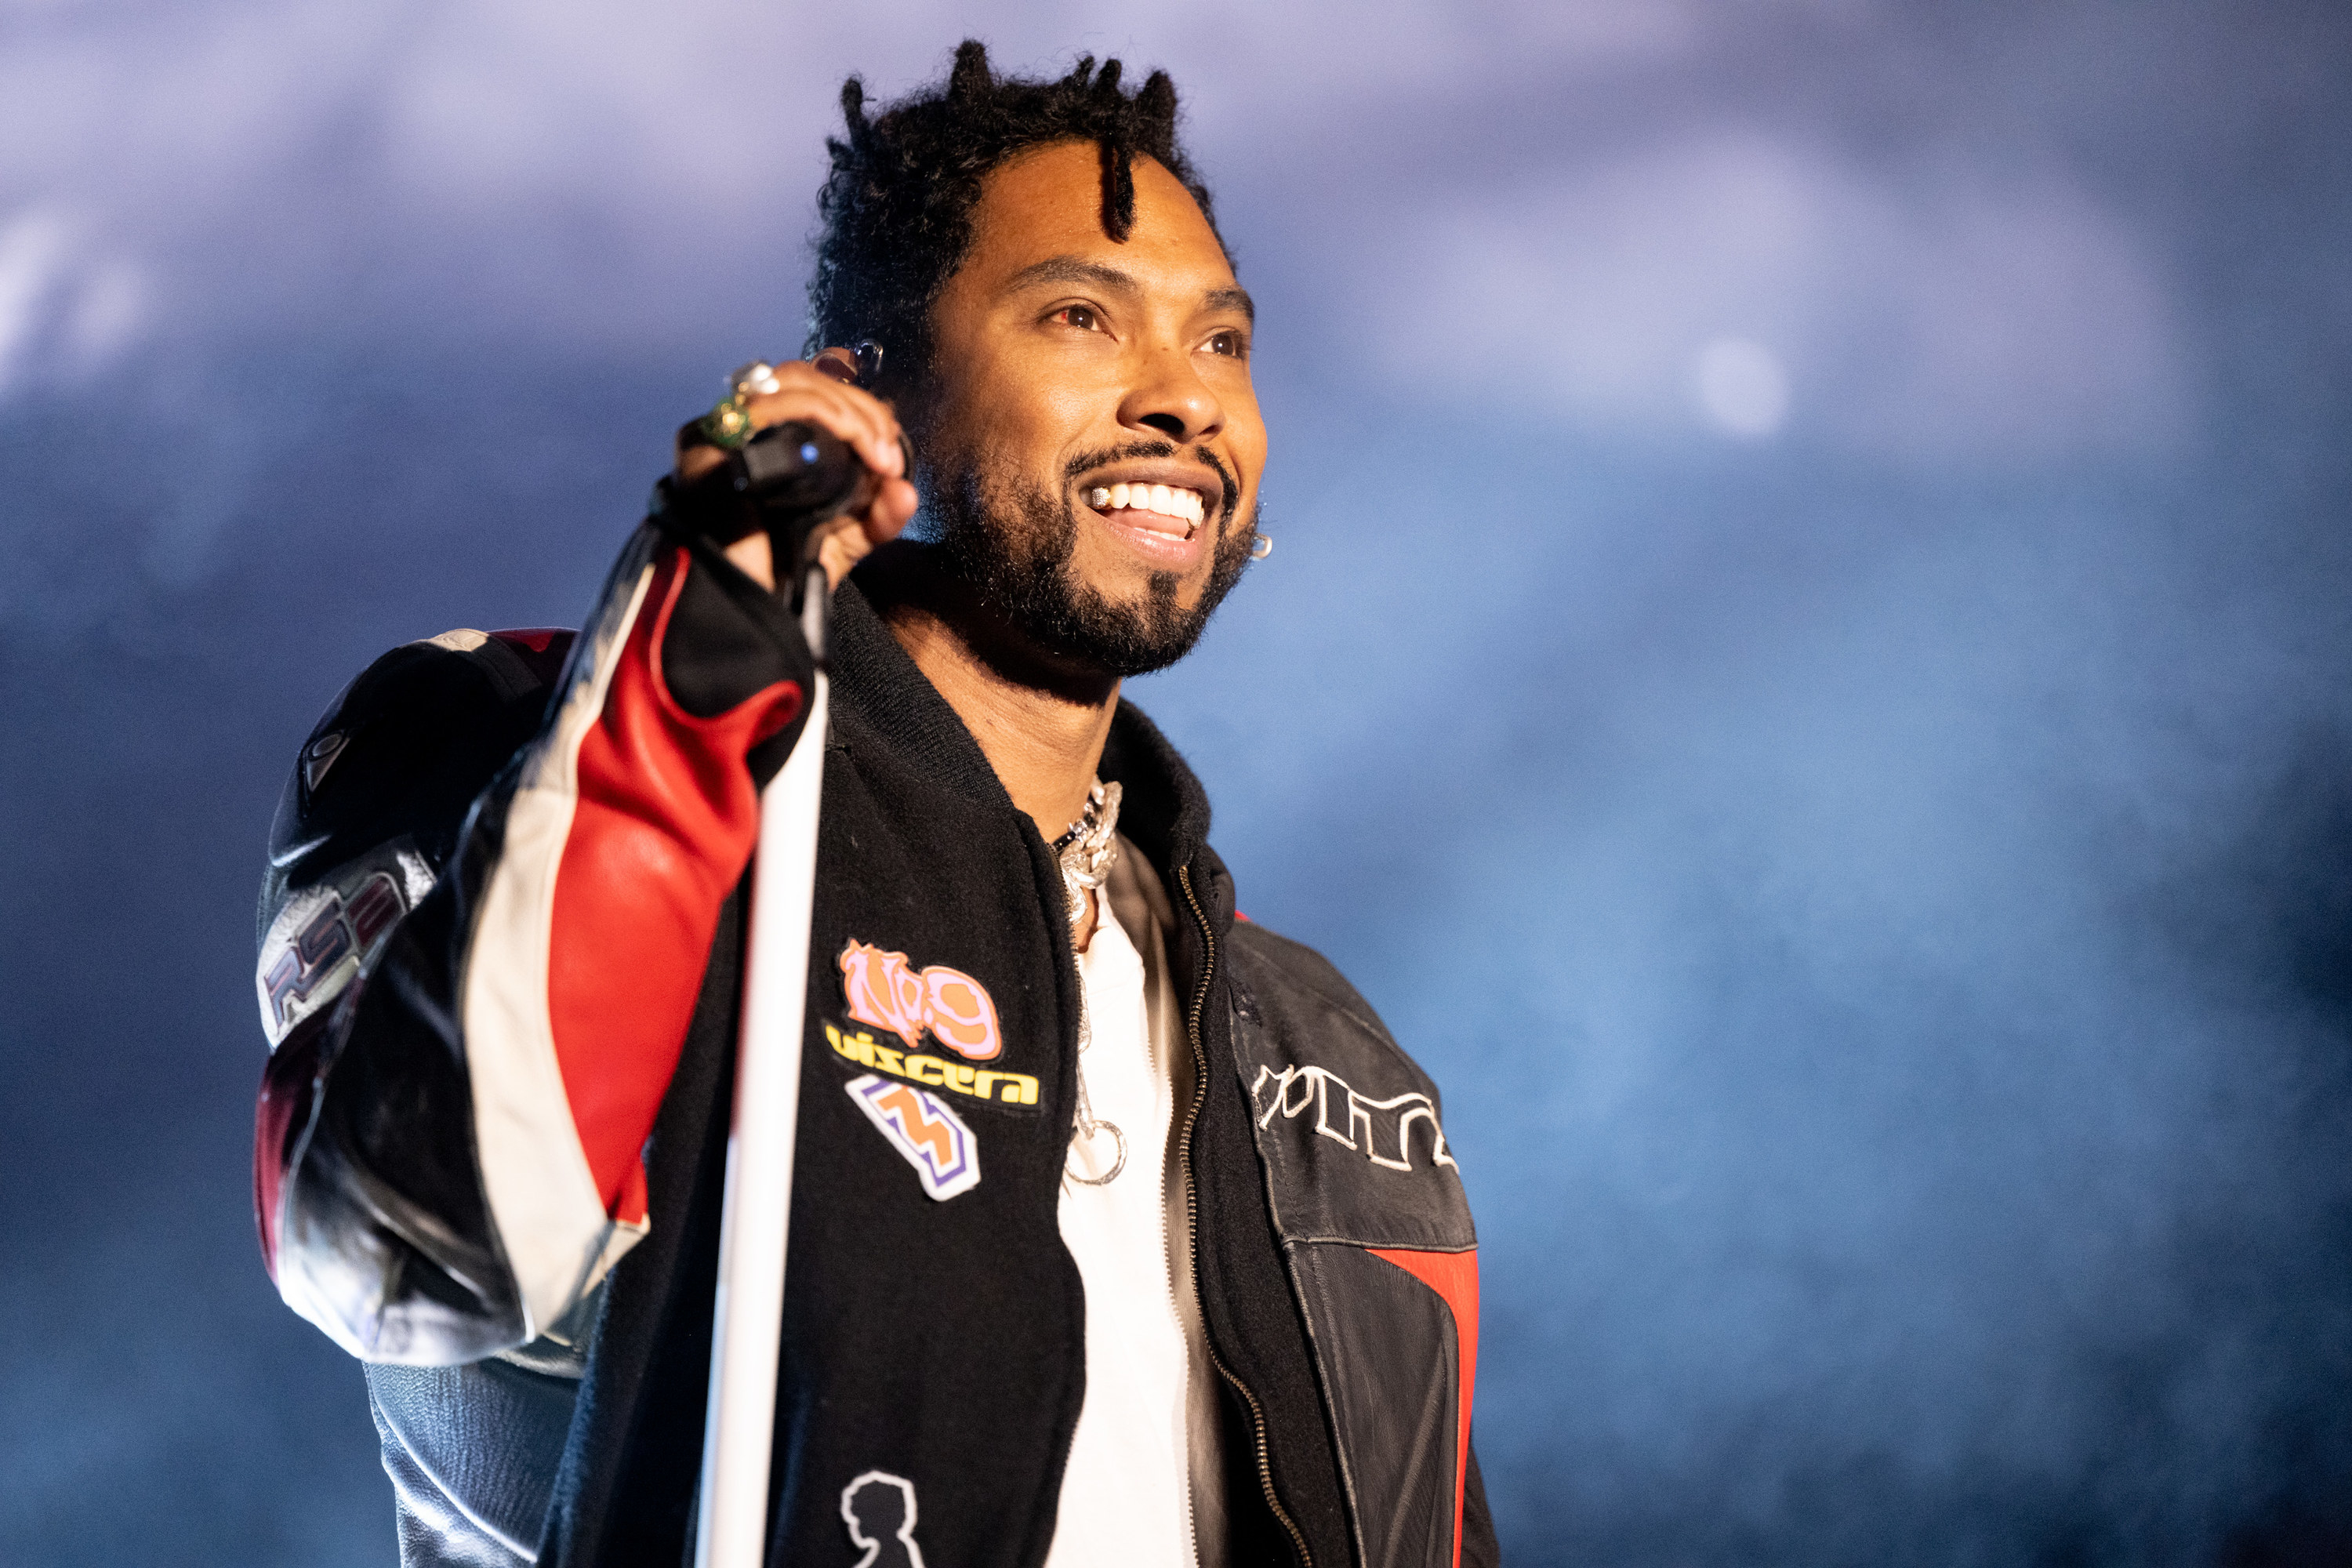 Miguel sings on stage while smiling holding a mic stand in his hand.